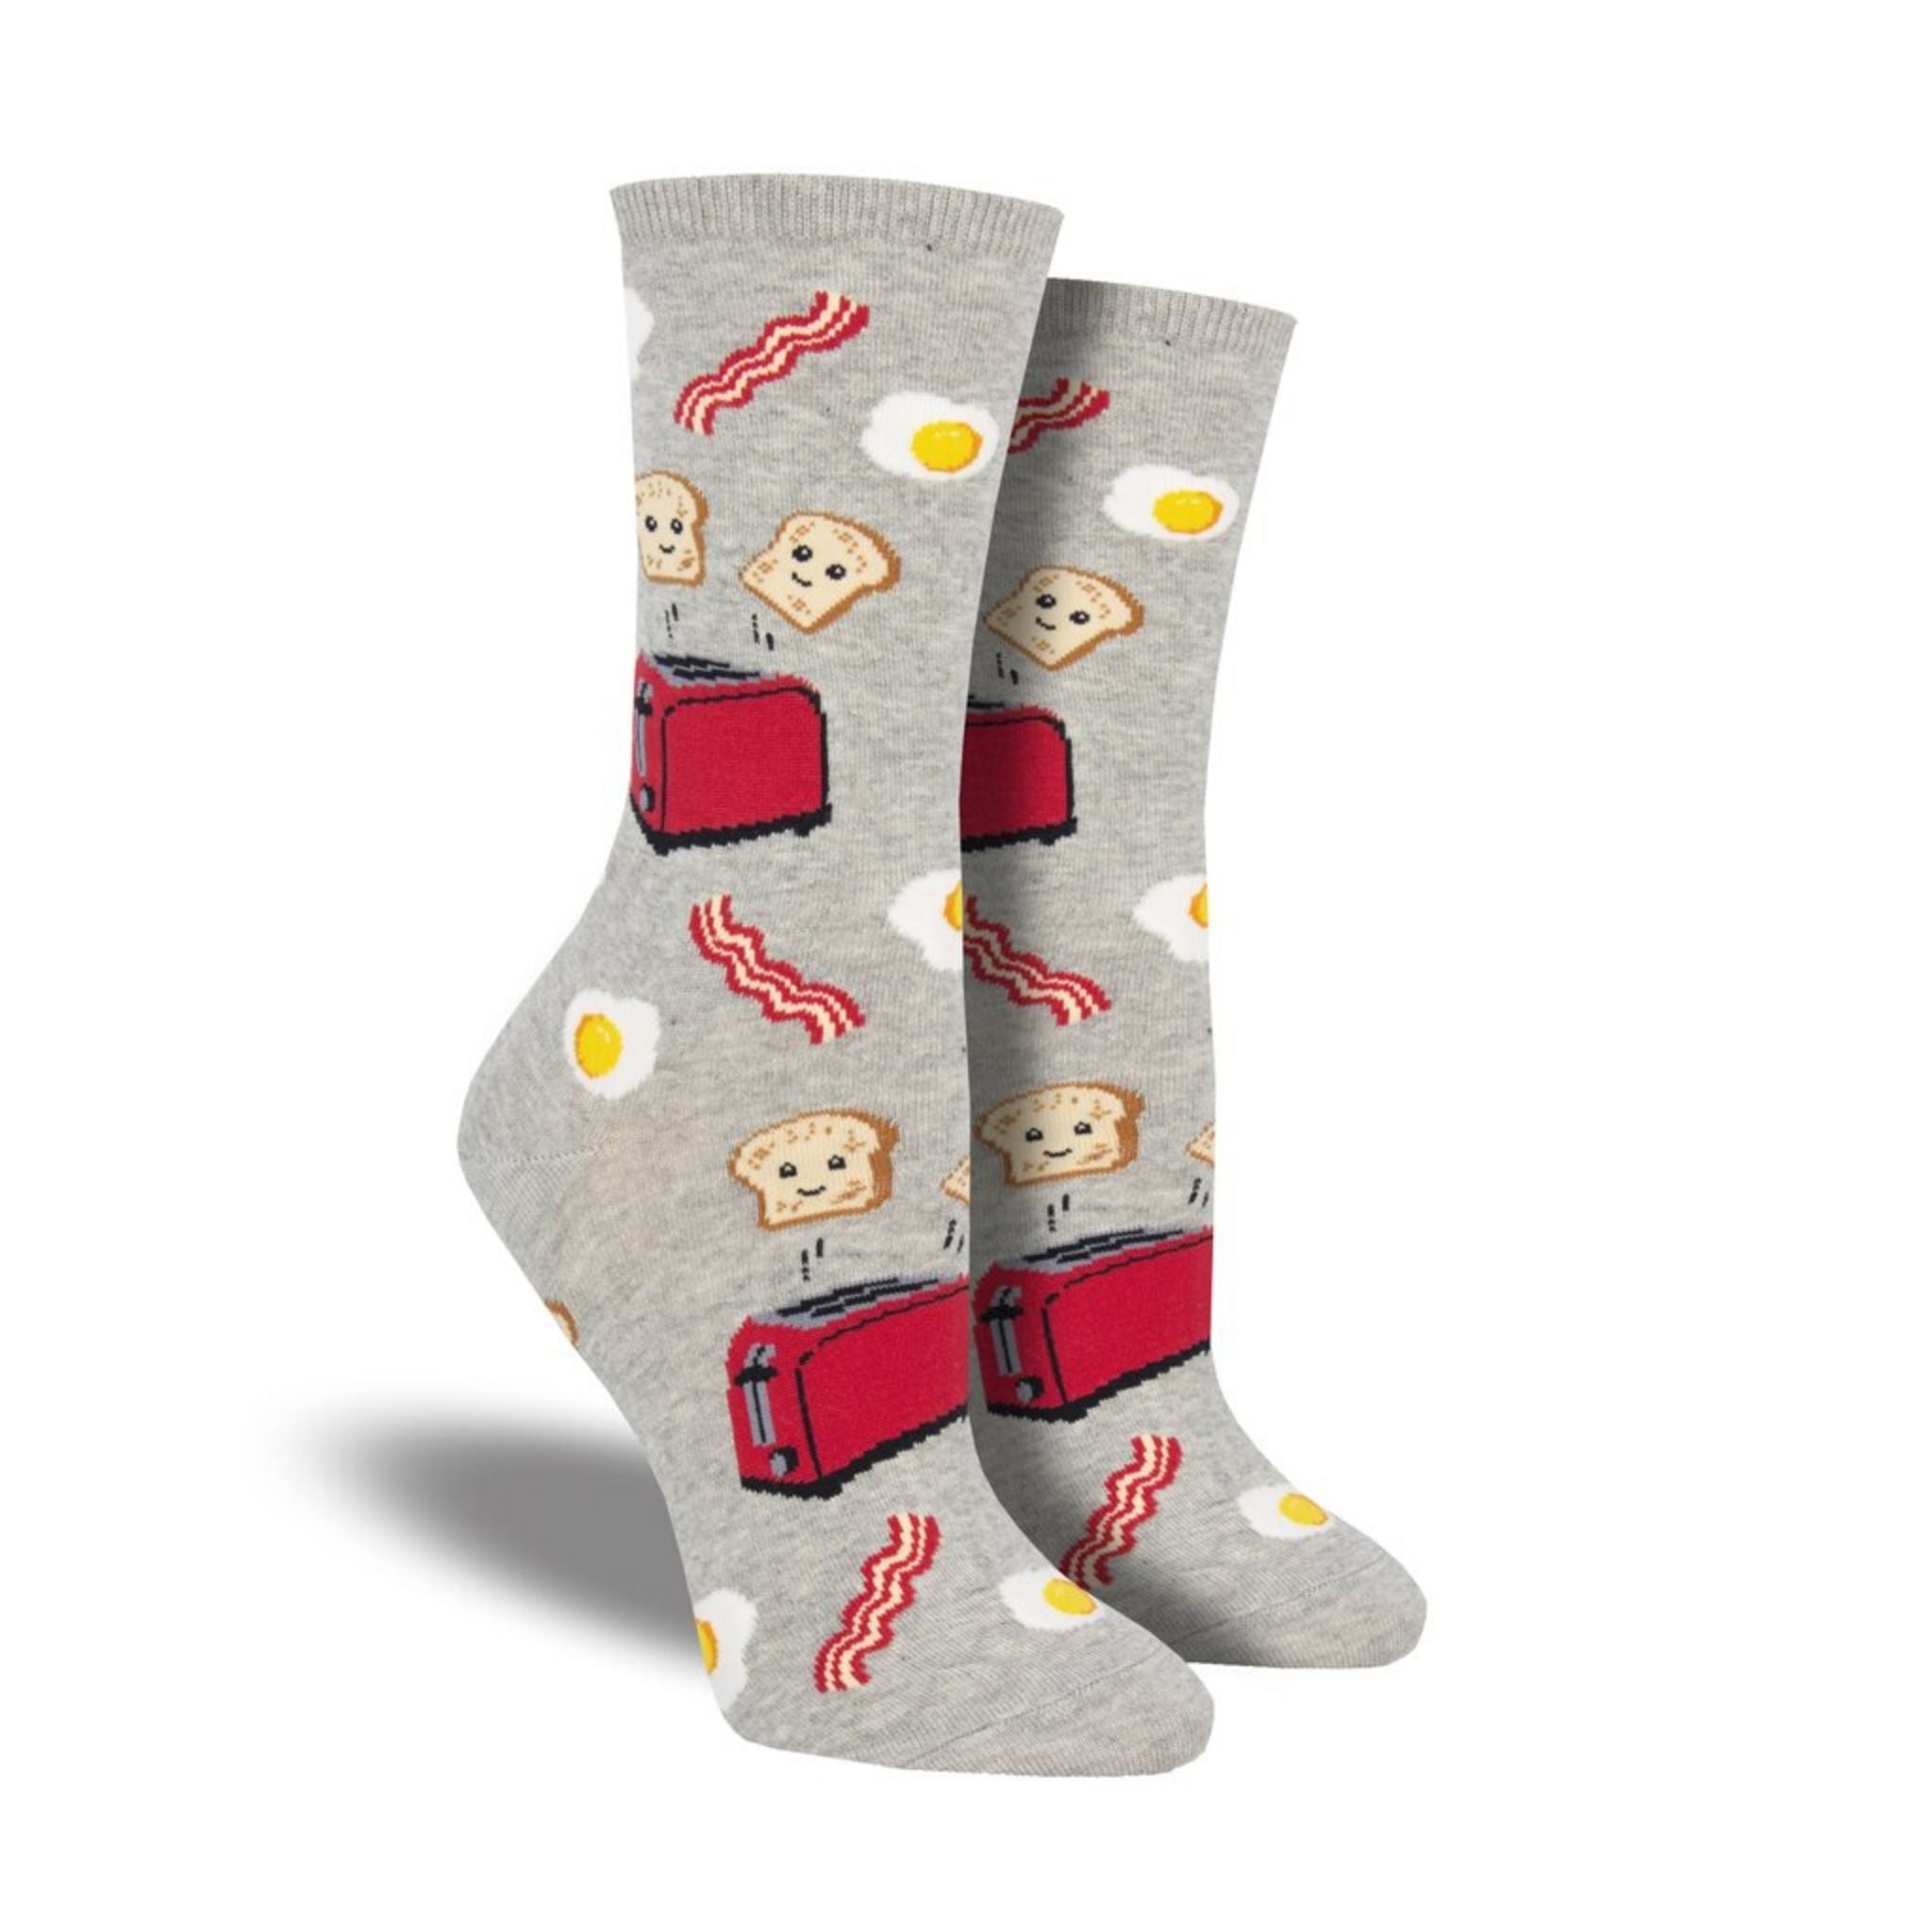 Grey  socks with toaster, eggs and bacon on them